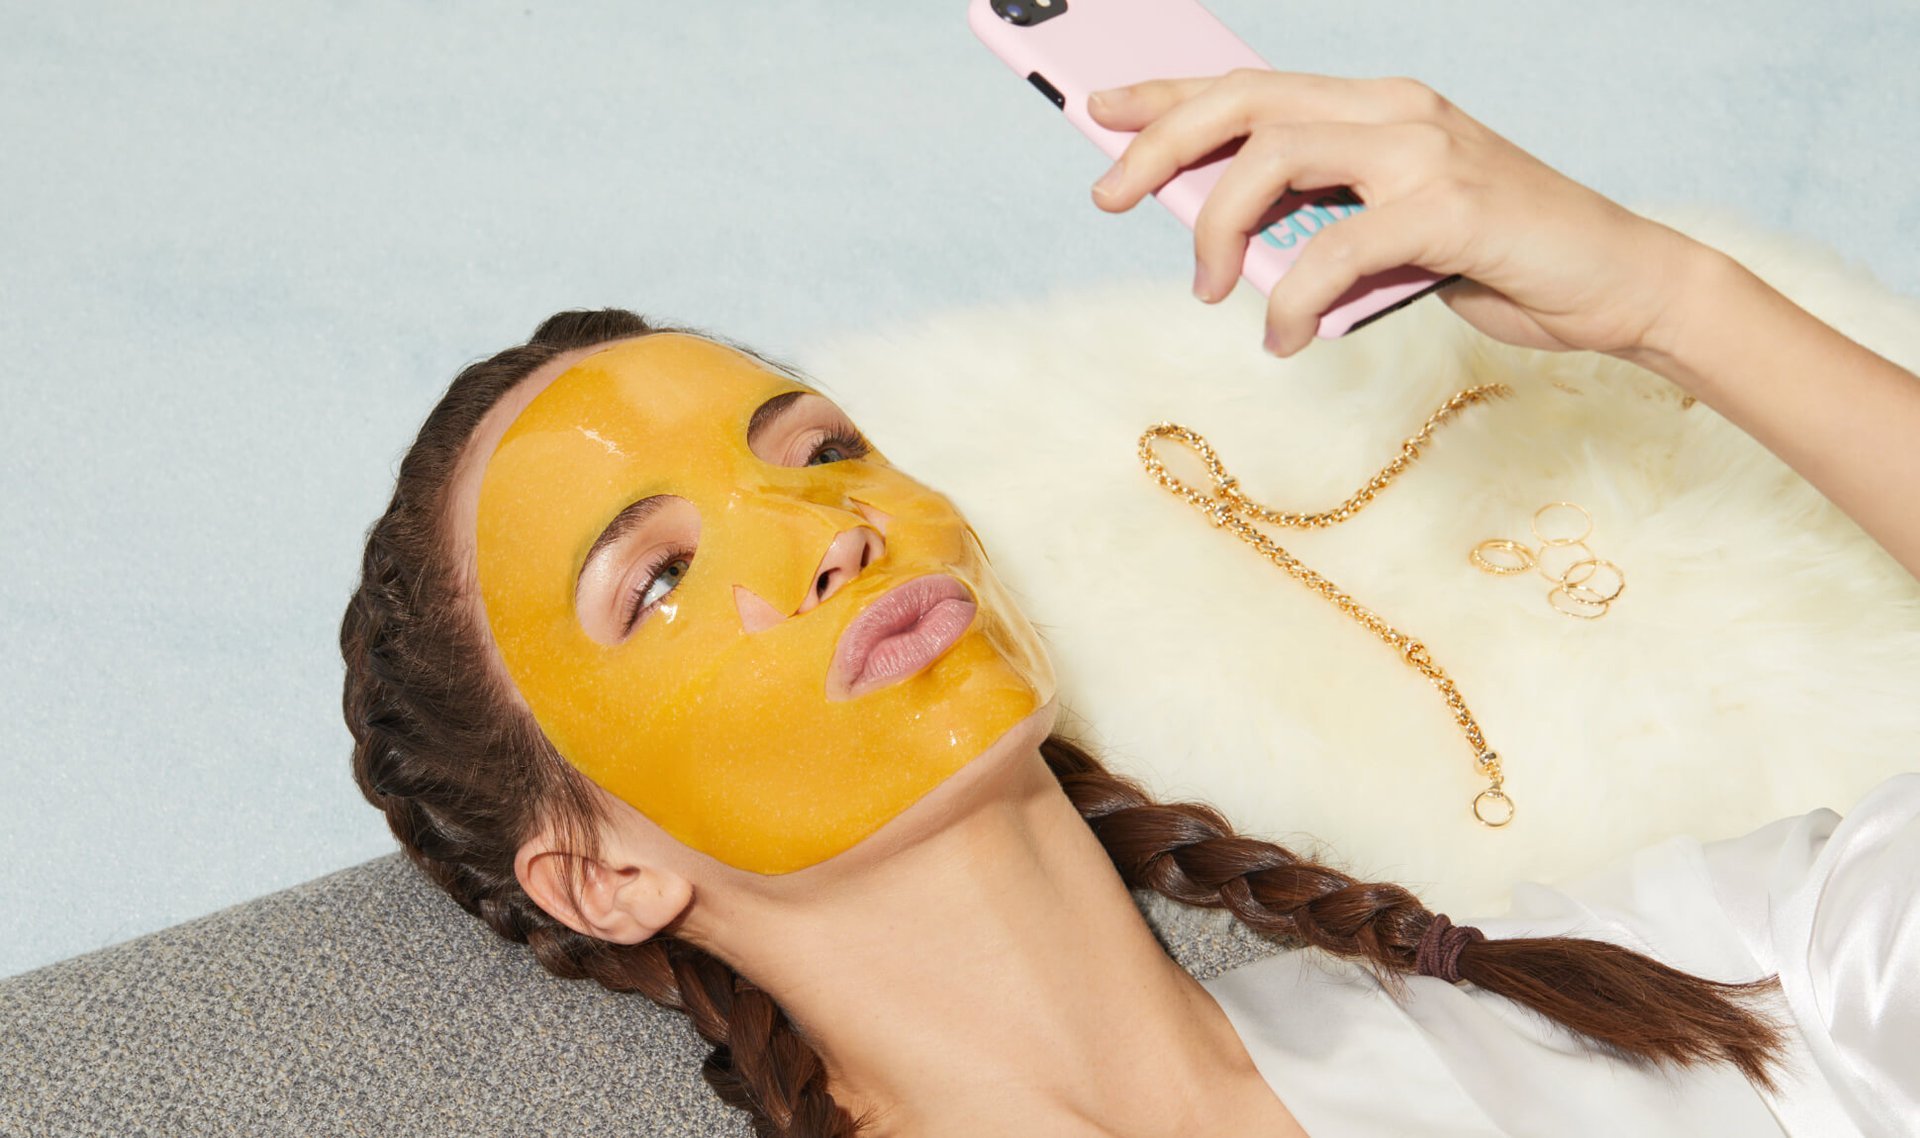 The Best Rubber Masks, According to Our Editors | Skincare.com